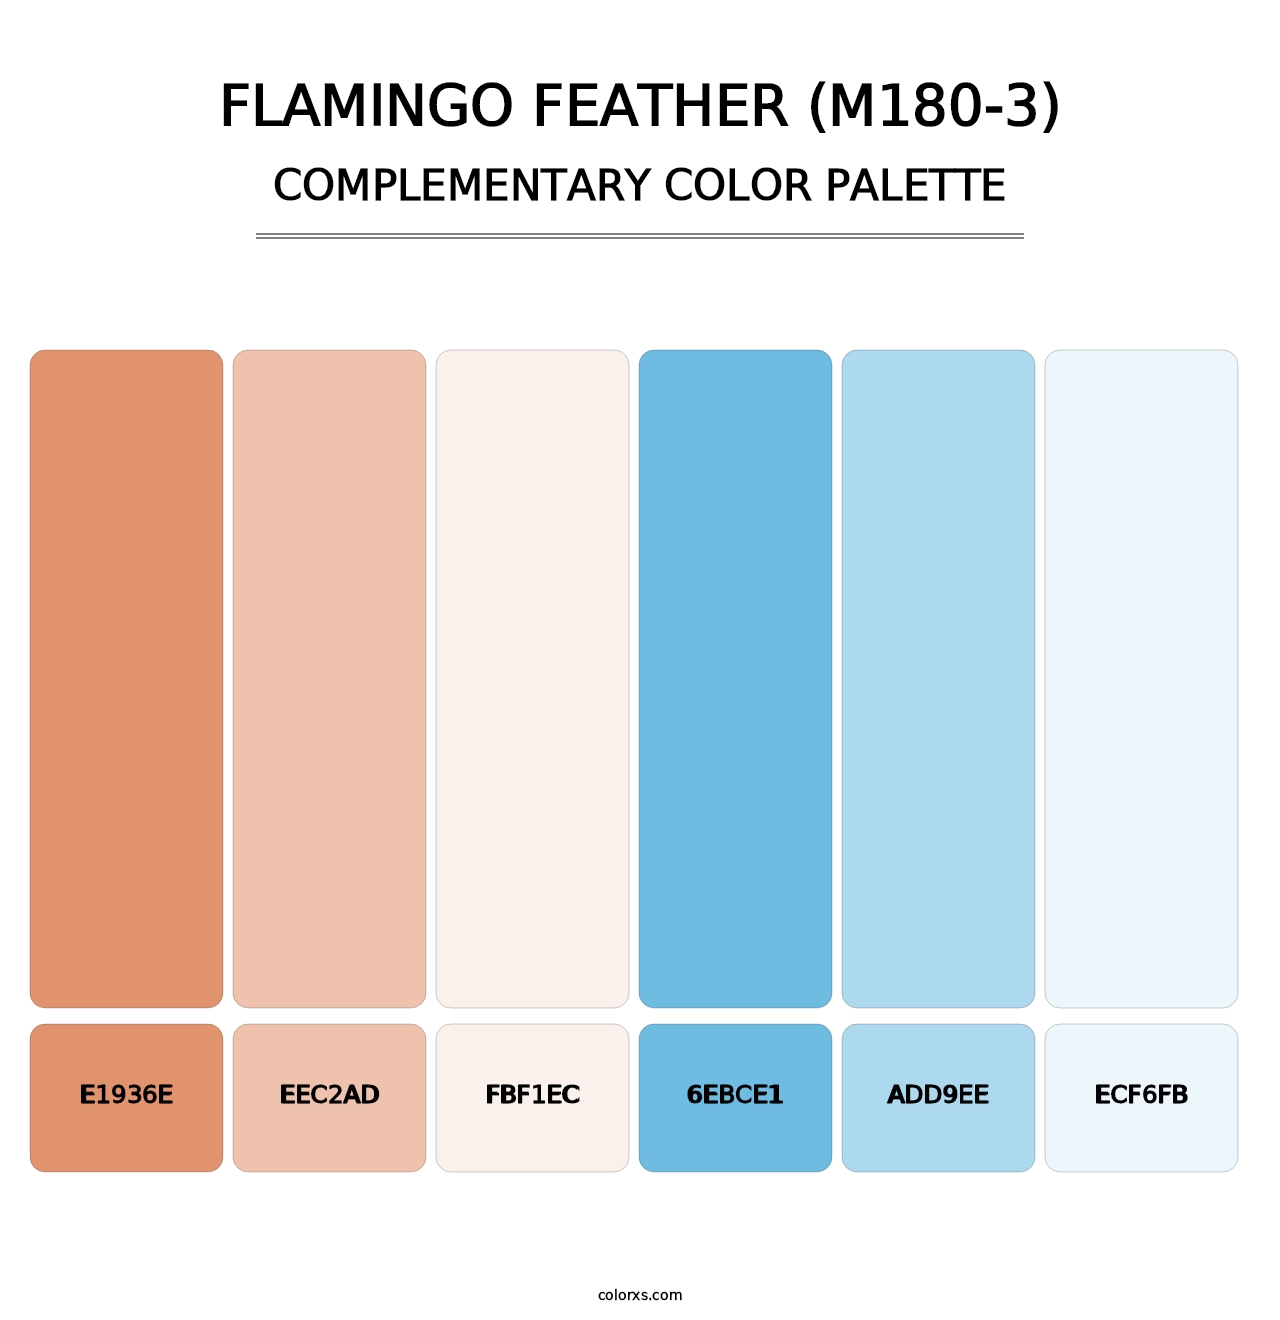 Flamingo Feather (M180-3) - Complementary Color Palette